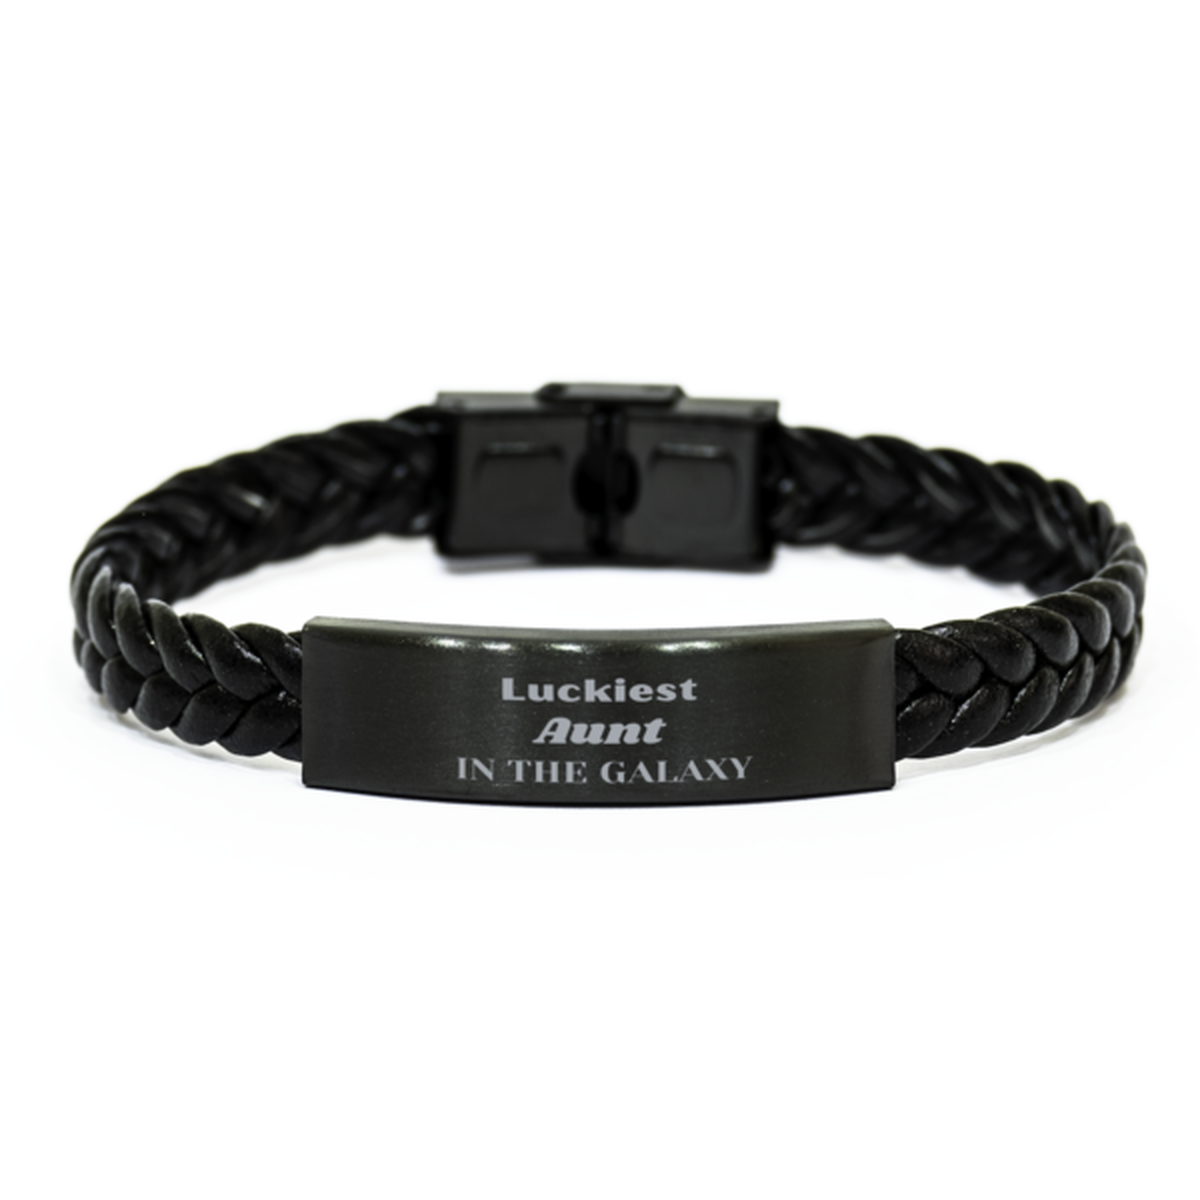 Luckiest Aunt in the Galaxy, To My Aunt Engraved Gifts, Christmas Aunt Braided Leather Bracelet Gifts, X-mas Birthday Unique Gifts For Aunt Men Women